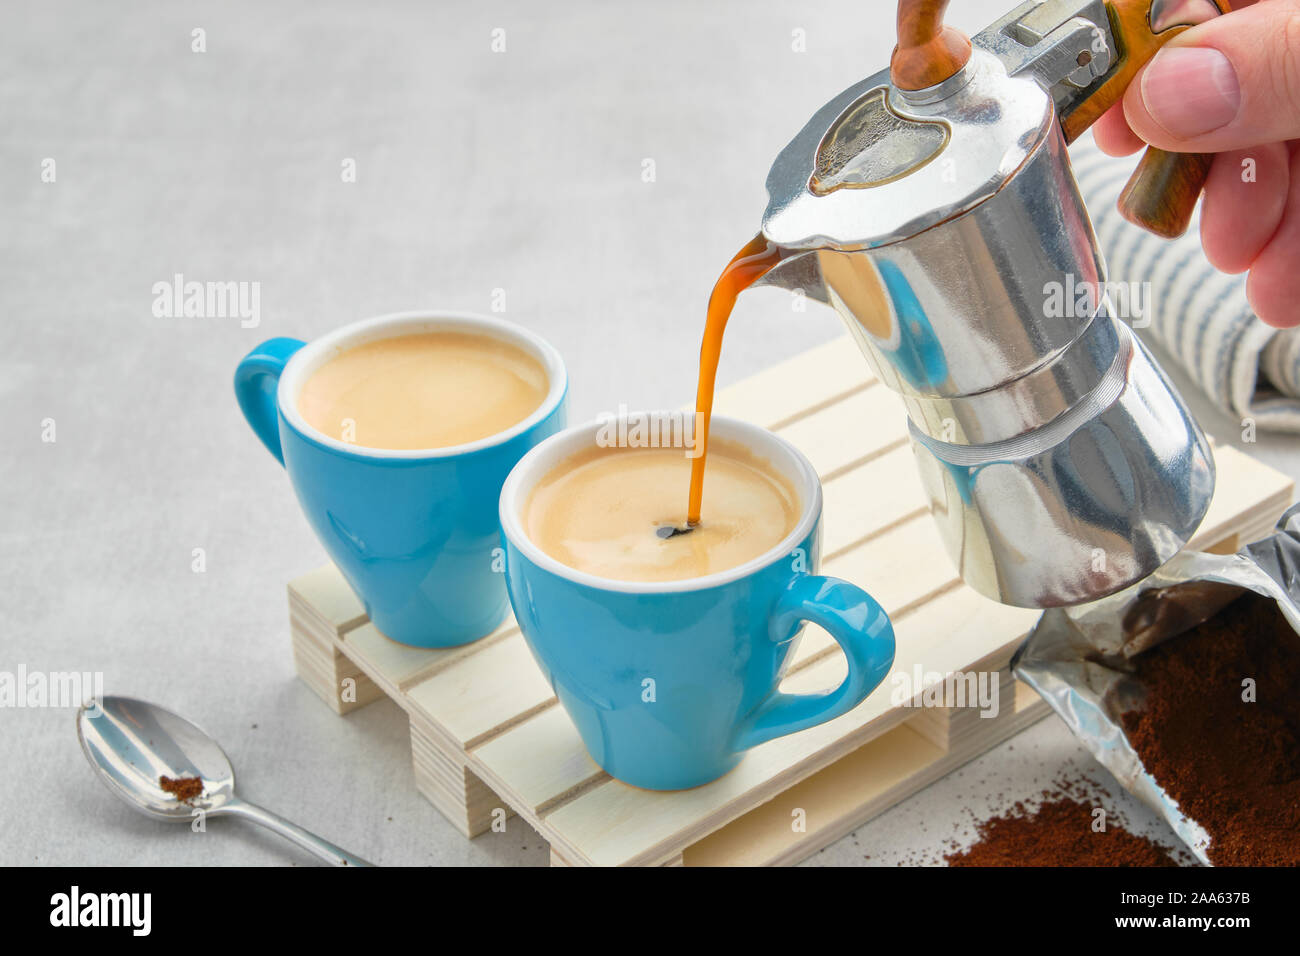 Coffee pouring in blue cups from Italian coffee espresso maker. Two coffee mugs and moka coffee pot. Stock Photo